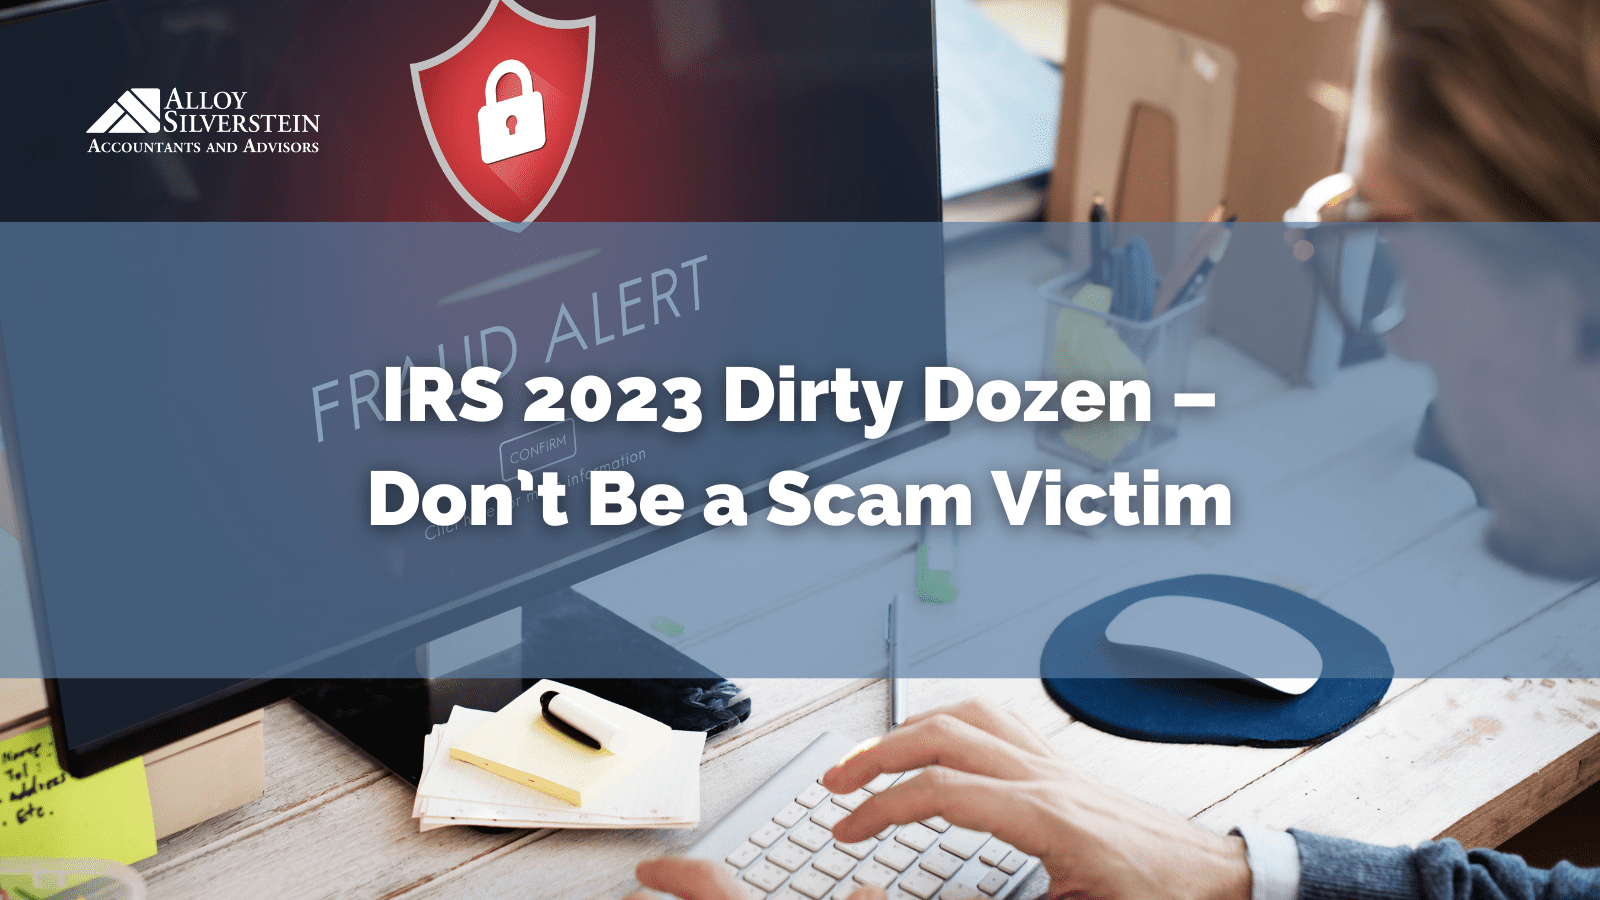 IRS 2023 Dirty Dozen – Don’t Be a Scam Victim - Alloy Silverstein